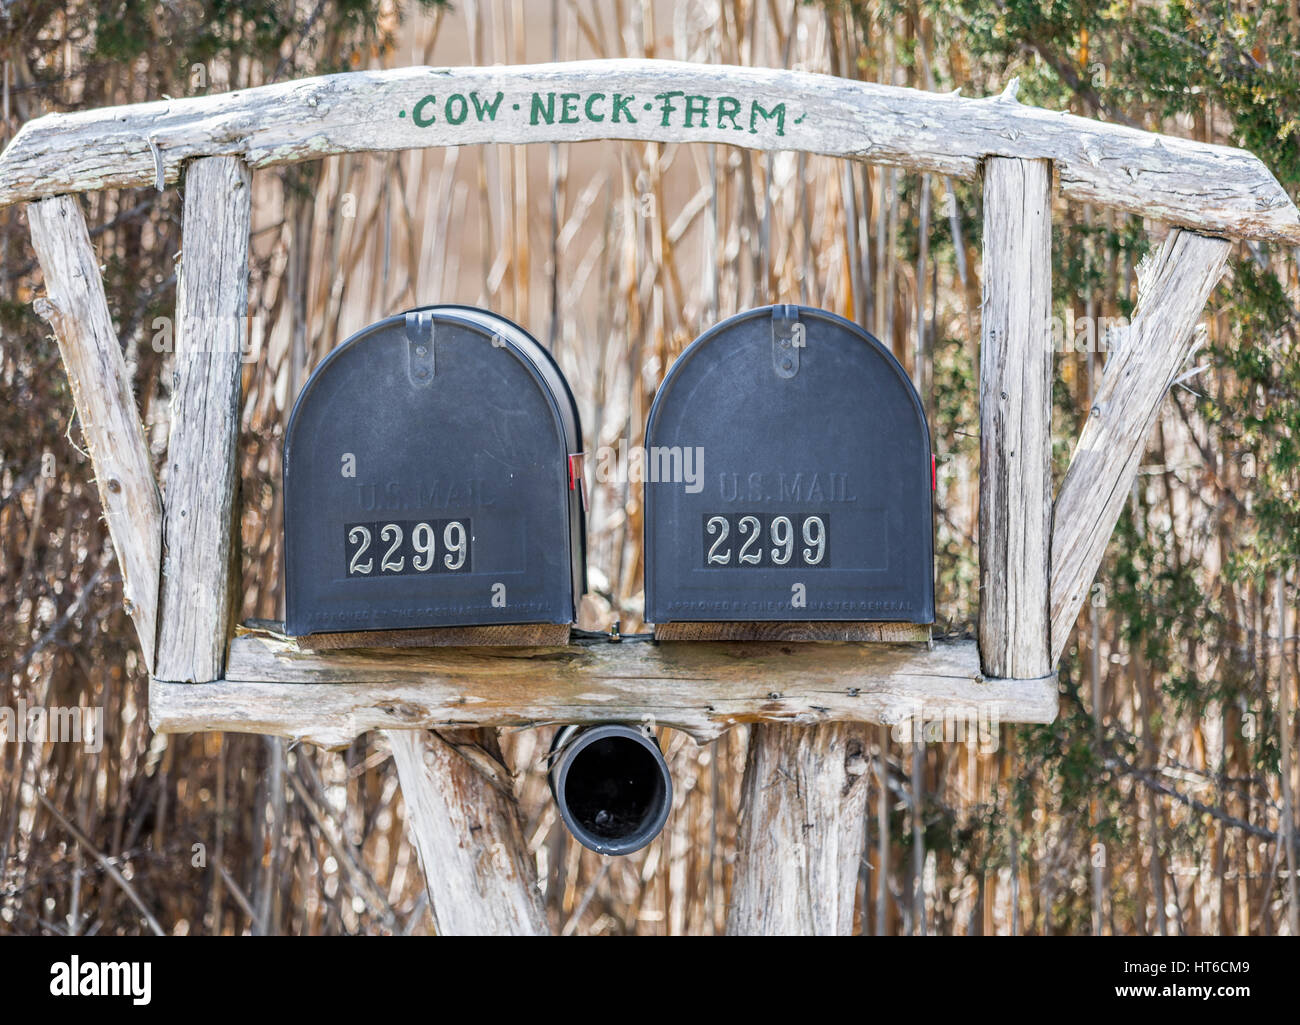 cow neck farm sign and two mail boxes Stock Photo